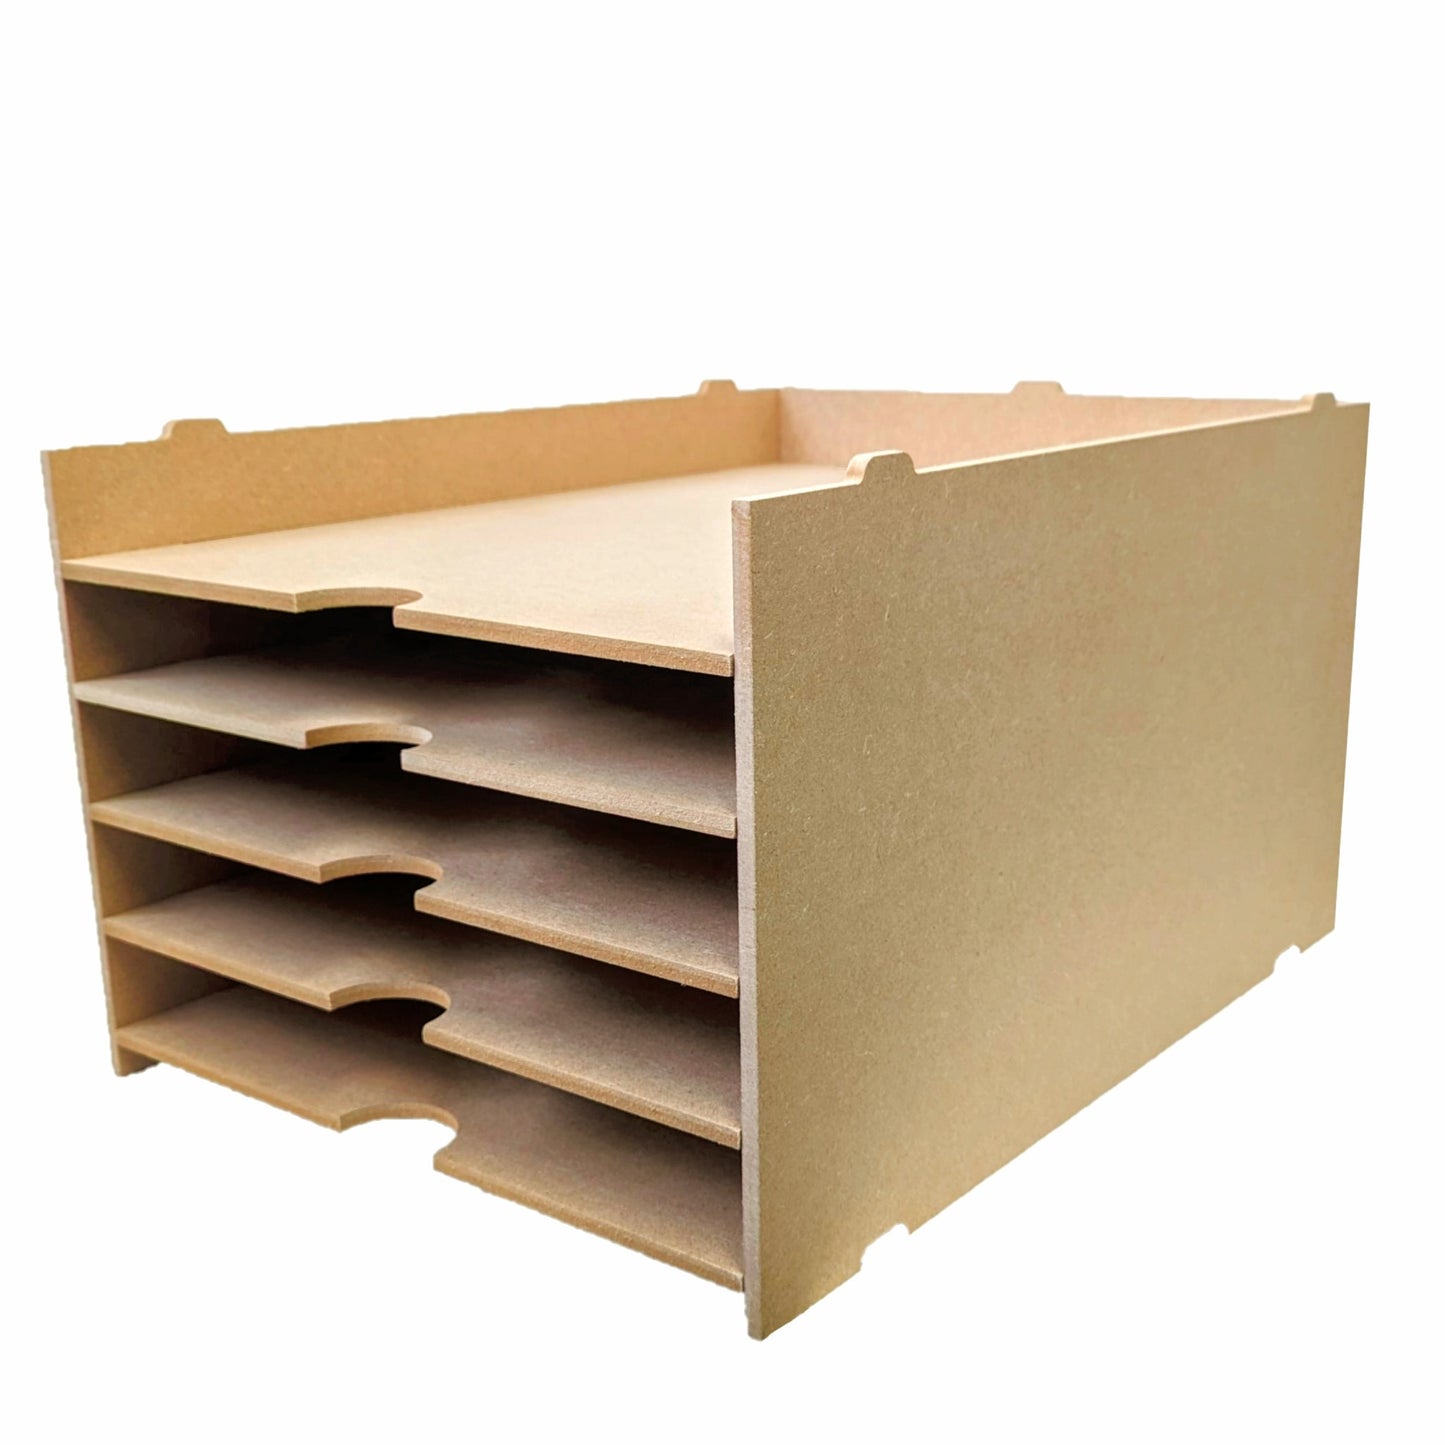 A3 Paper storage shelf, 5 shelves with stackable design